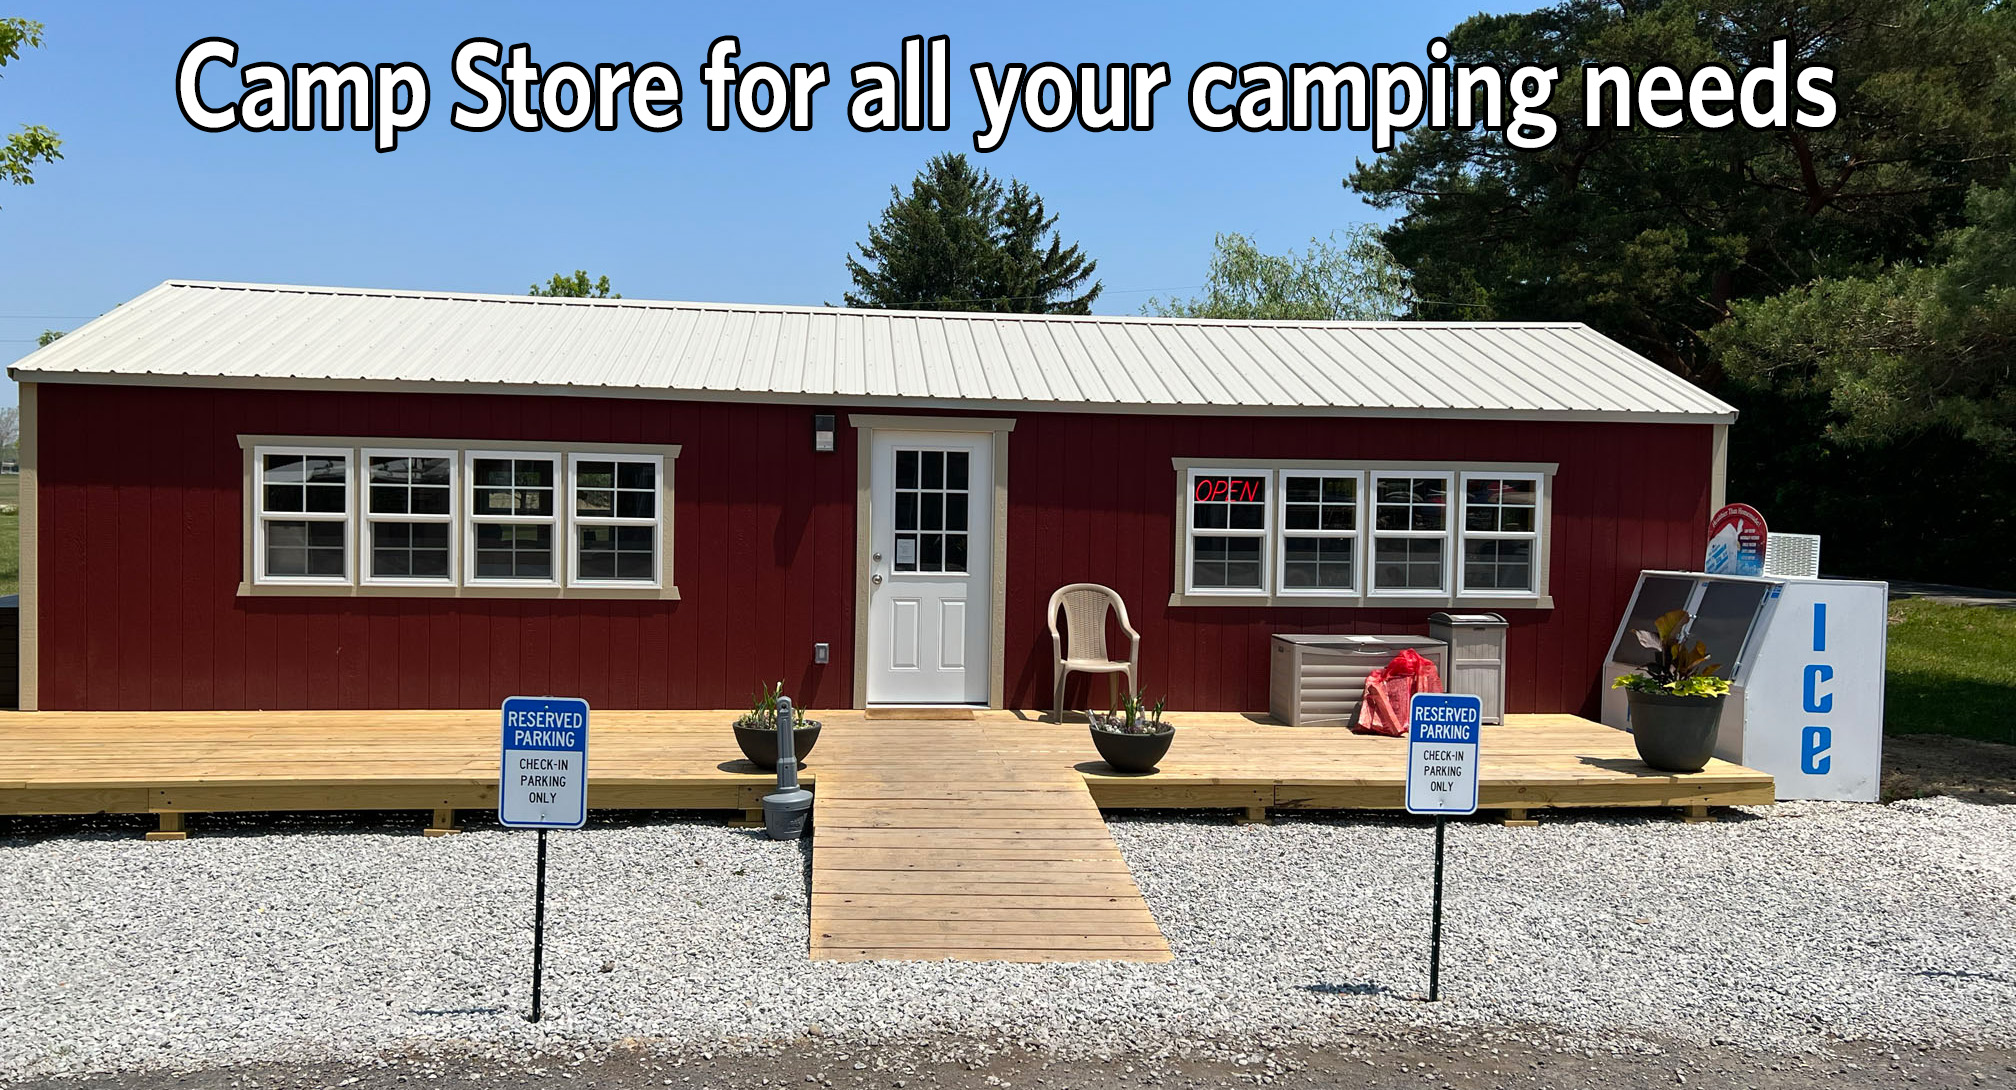 Camp Store for all your camping needs